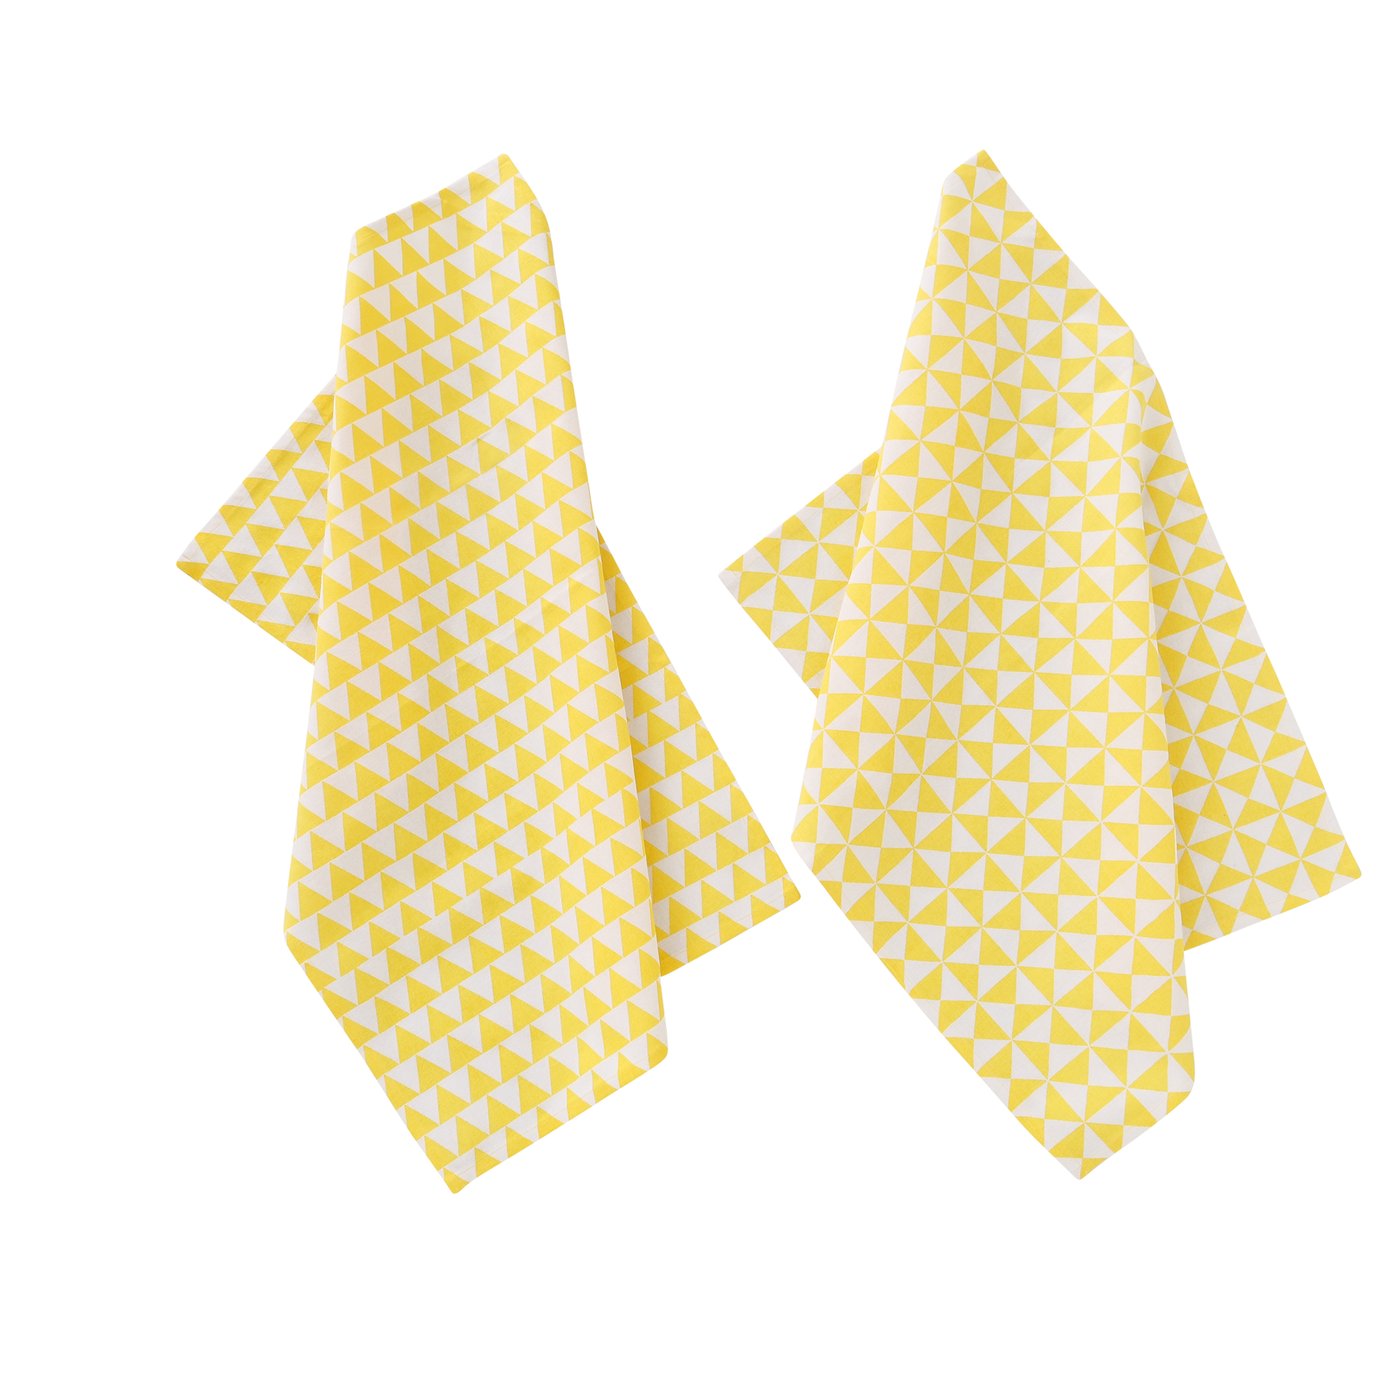 &Quirky Colour Pop Yellow Geometric Tea Towel : Triangles or Bows